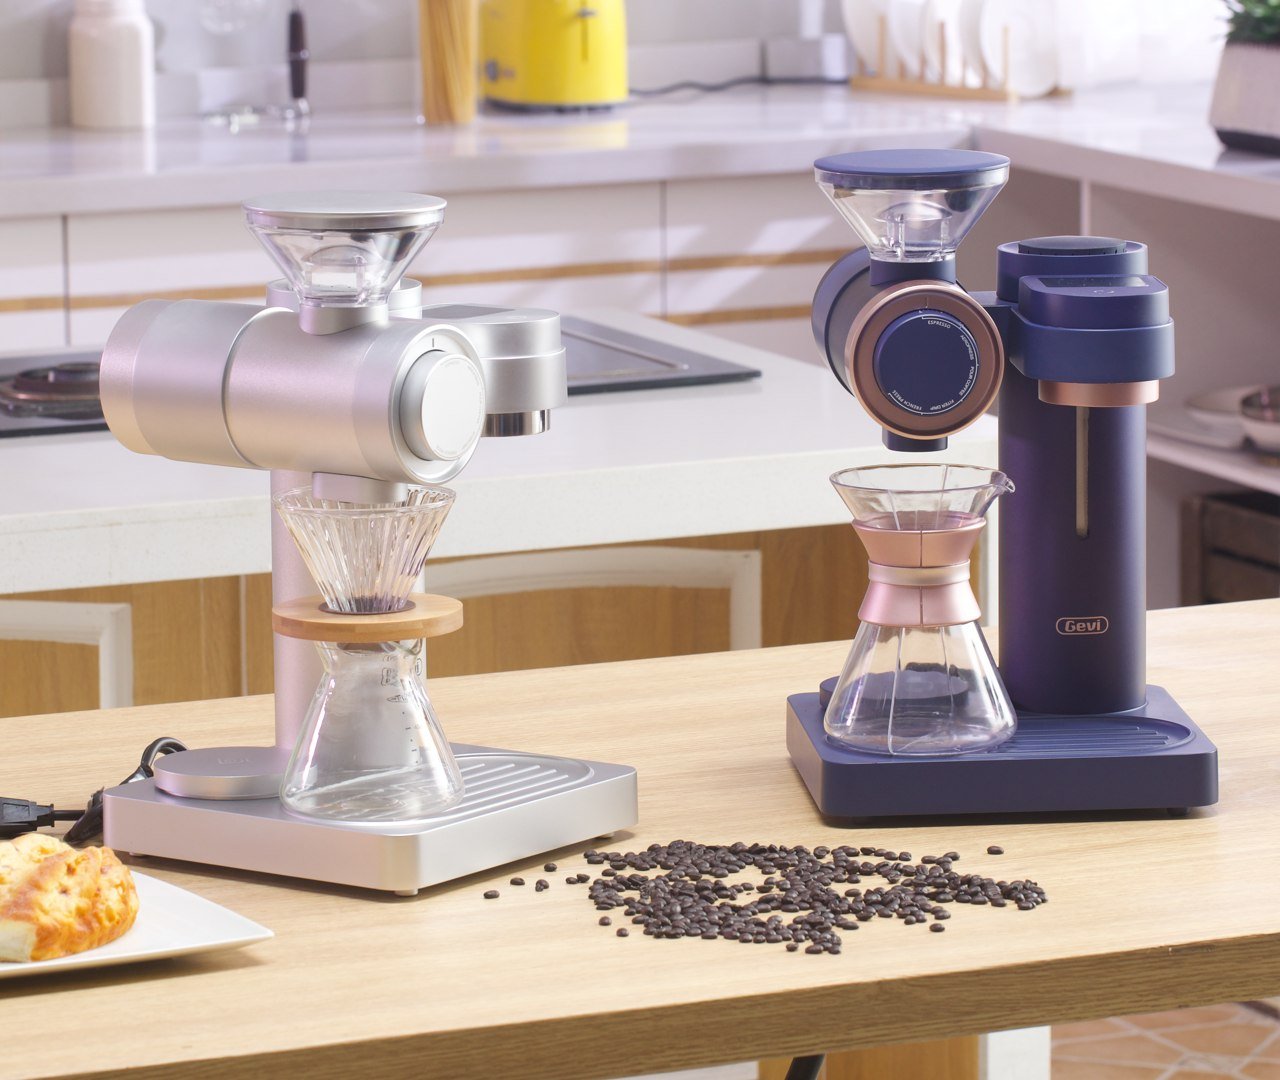 https://www.yankodesign.com/images/design_news/2021/07/2-in-1_coffee_grinder_and_pour-over_machine_05.jpg